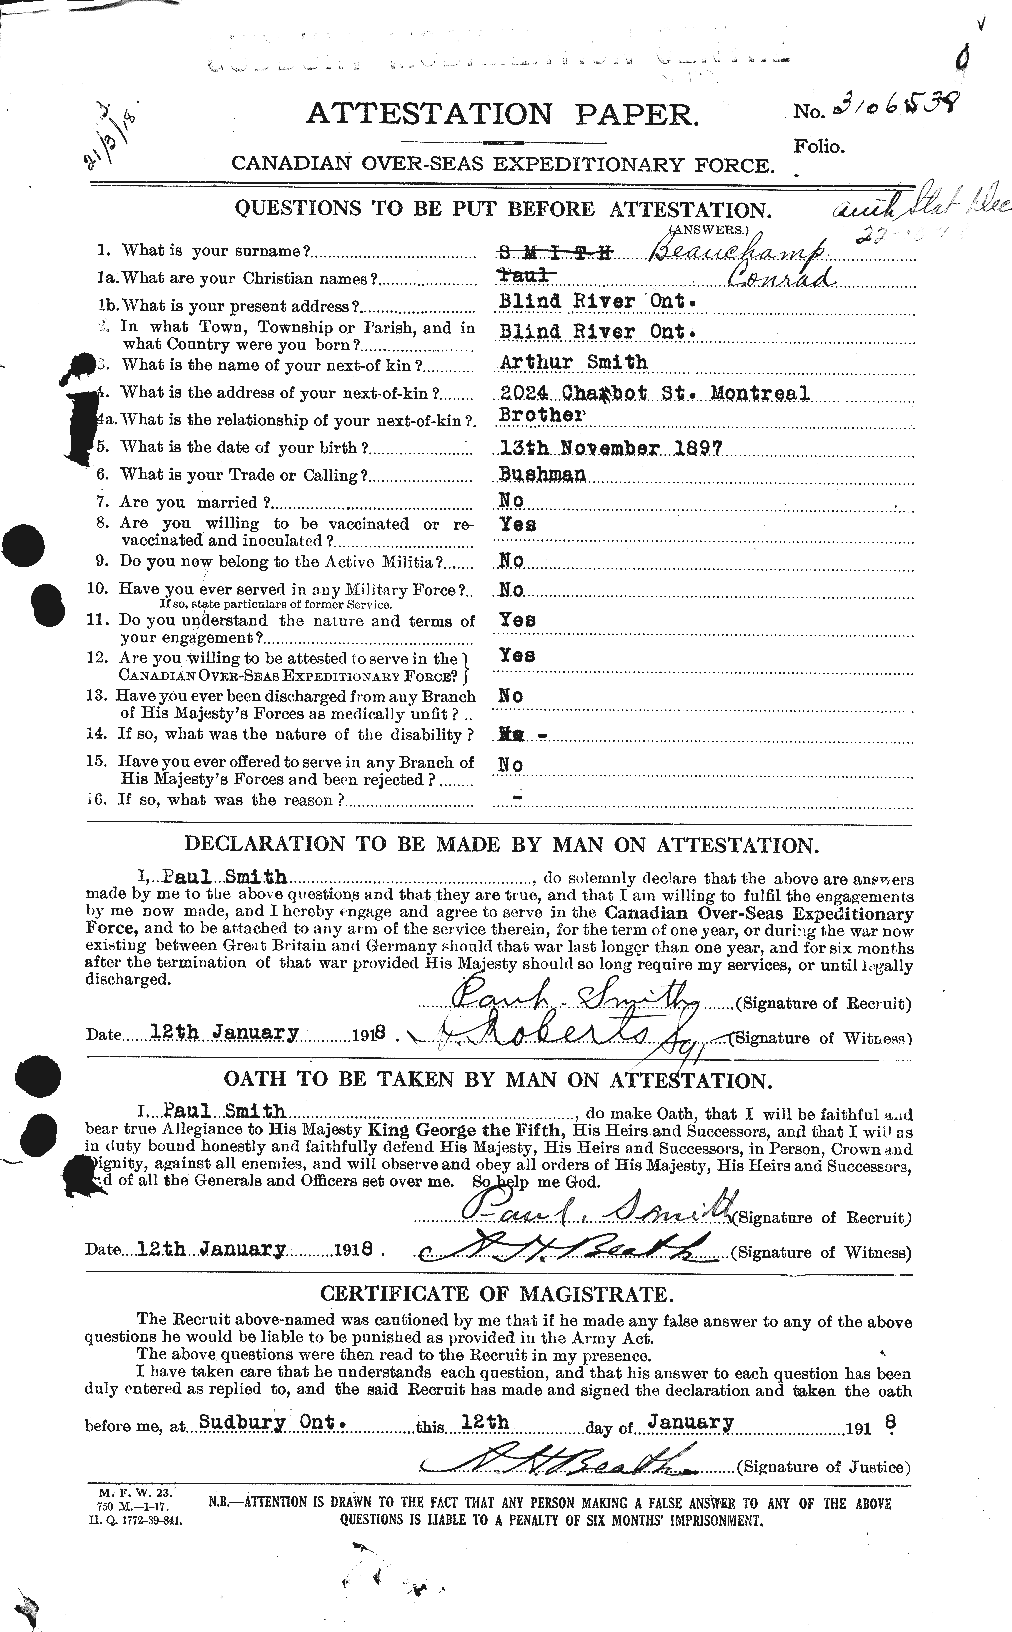 Personnel Records of the First World War - CEF 230949a